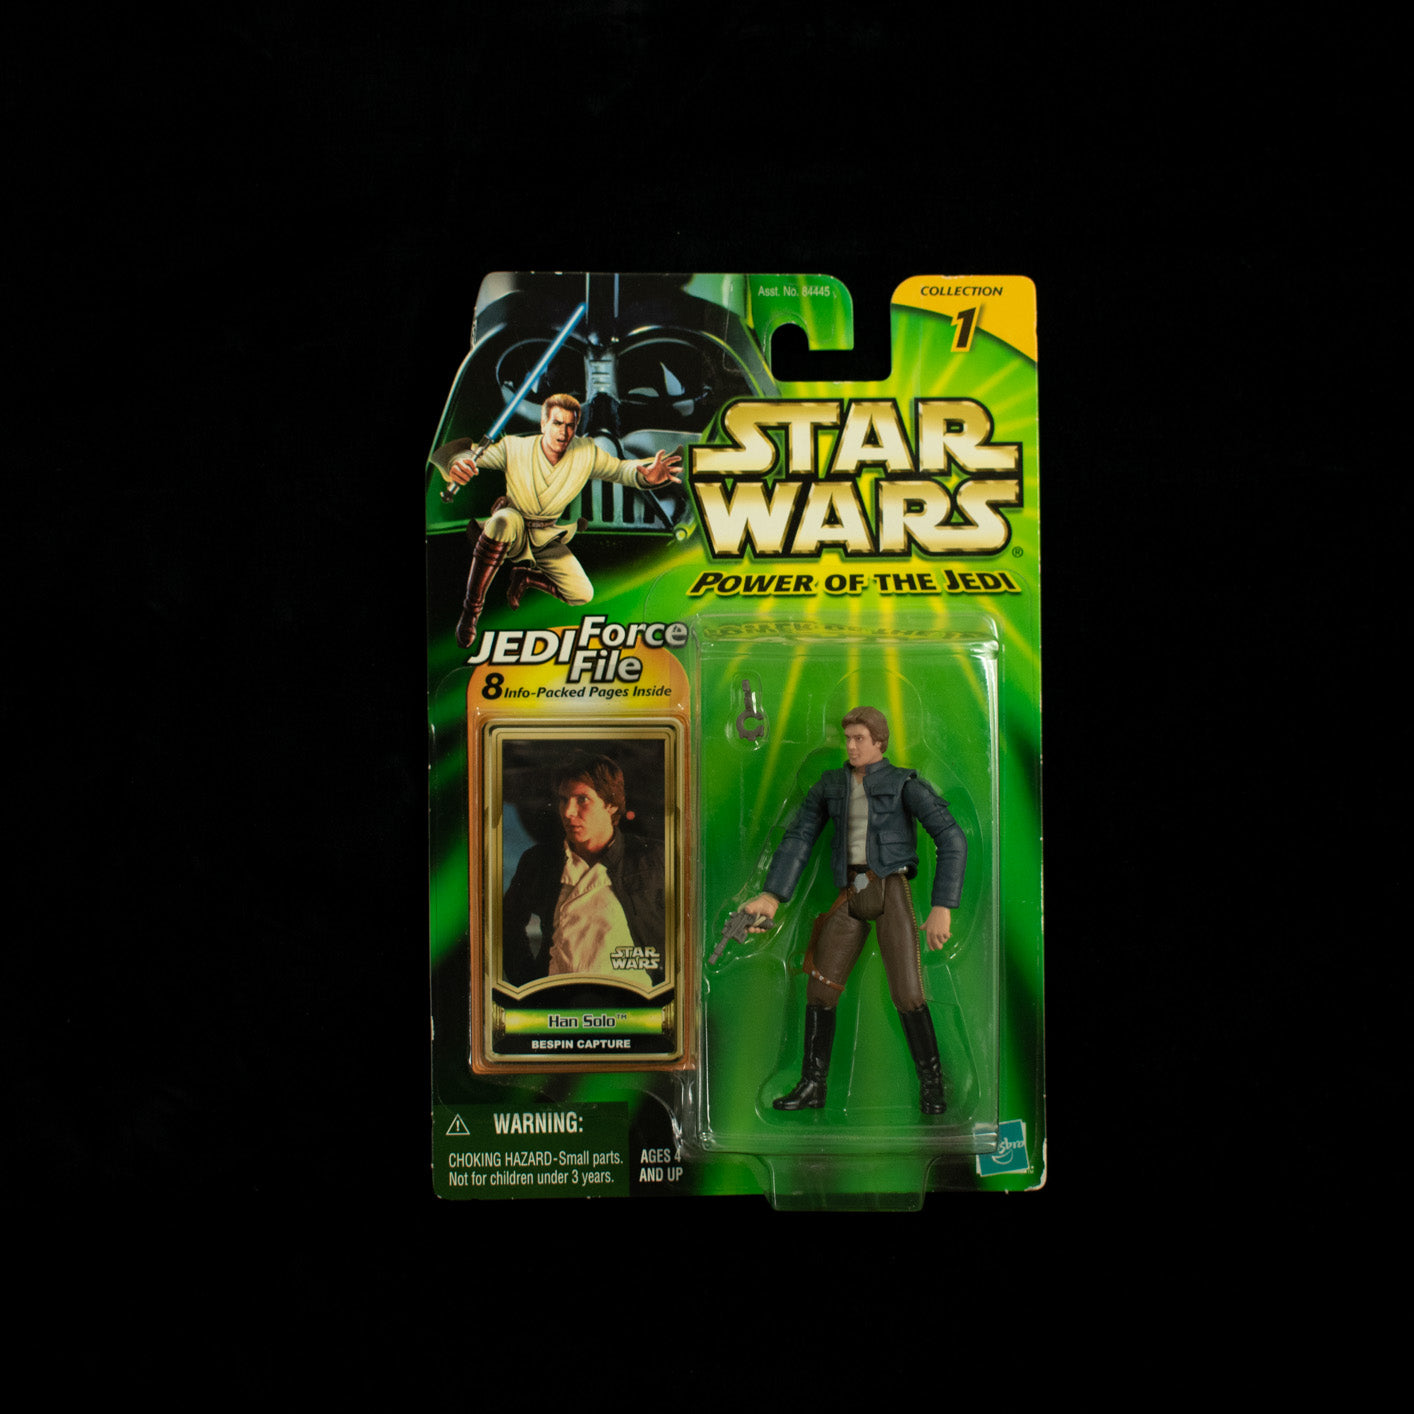 Star Wars Power of the Jedi Action Figure Han Solo